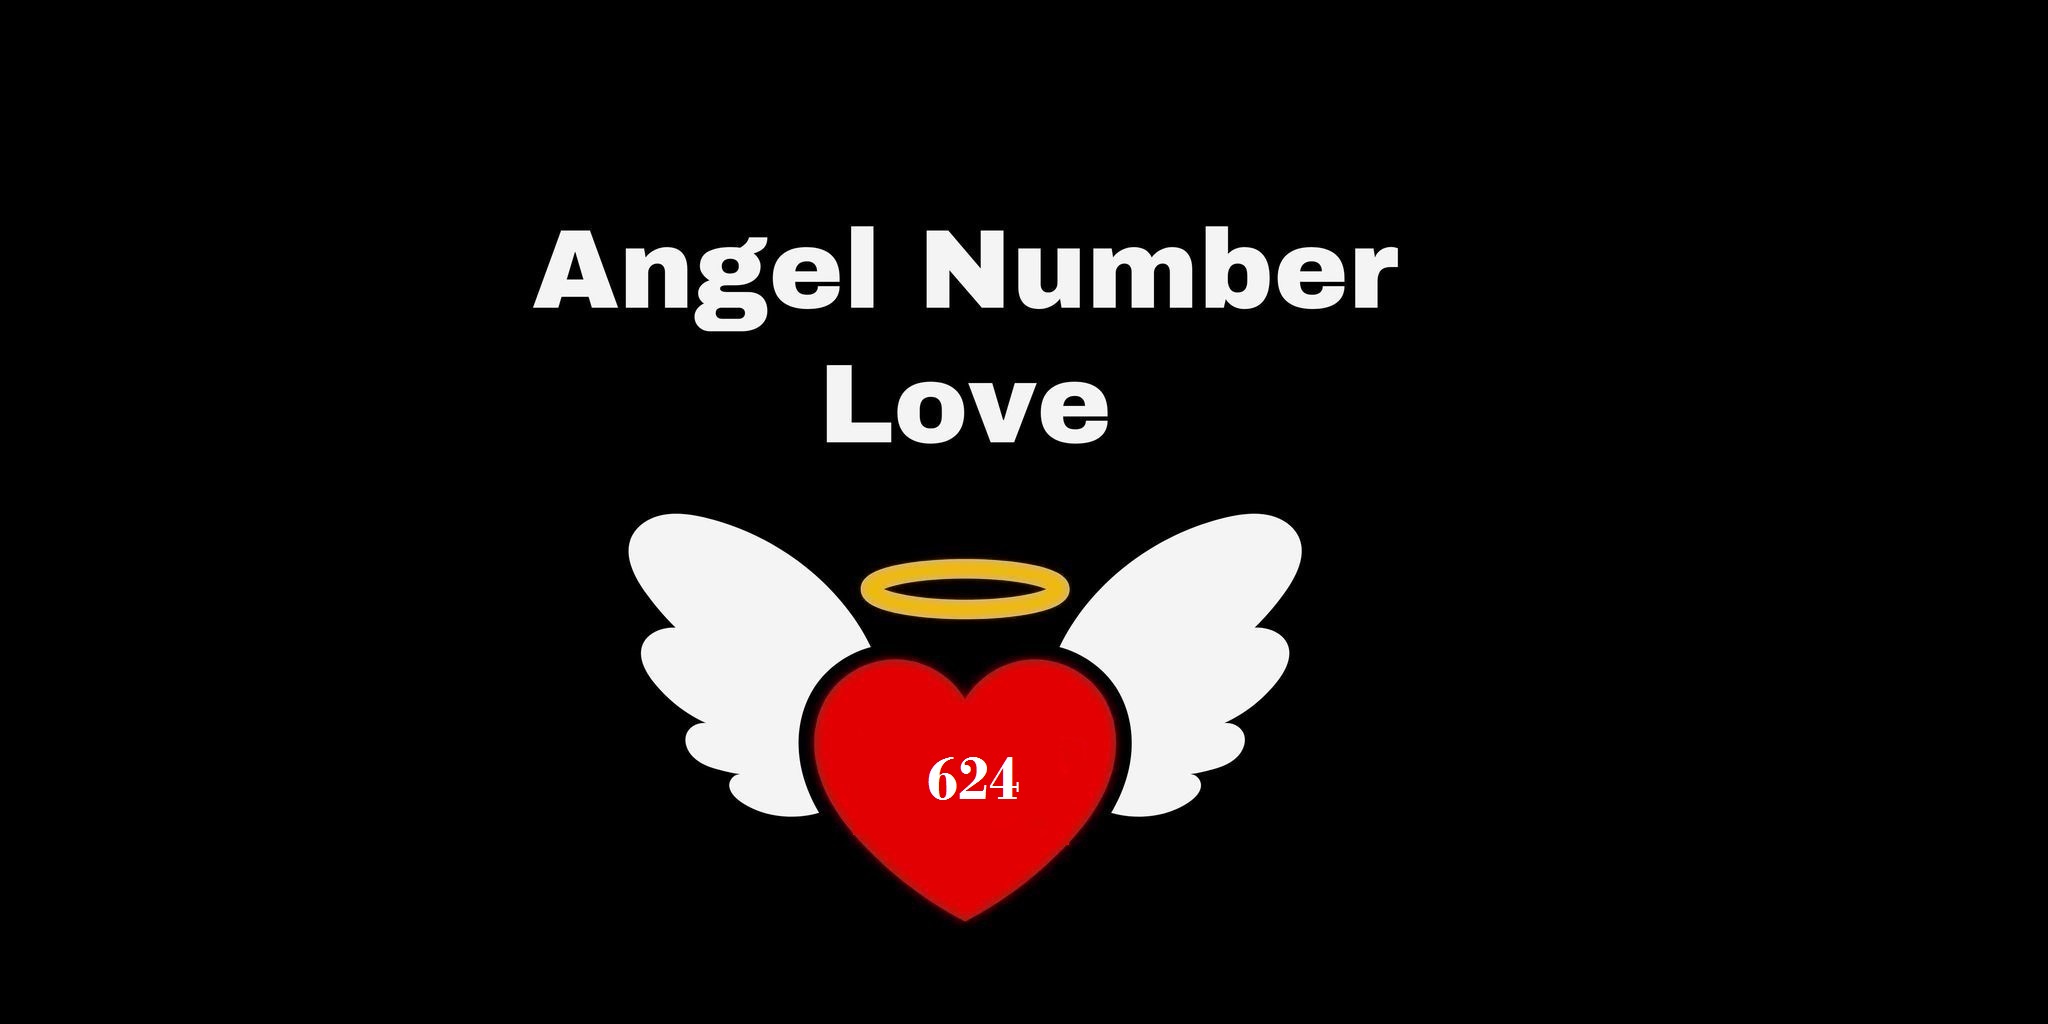 624 Angel Number Meaning In Love